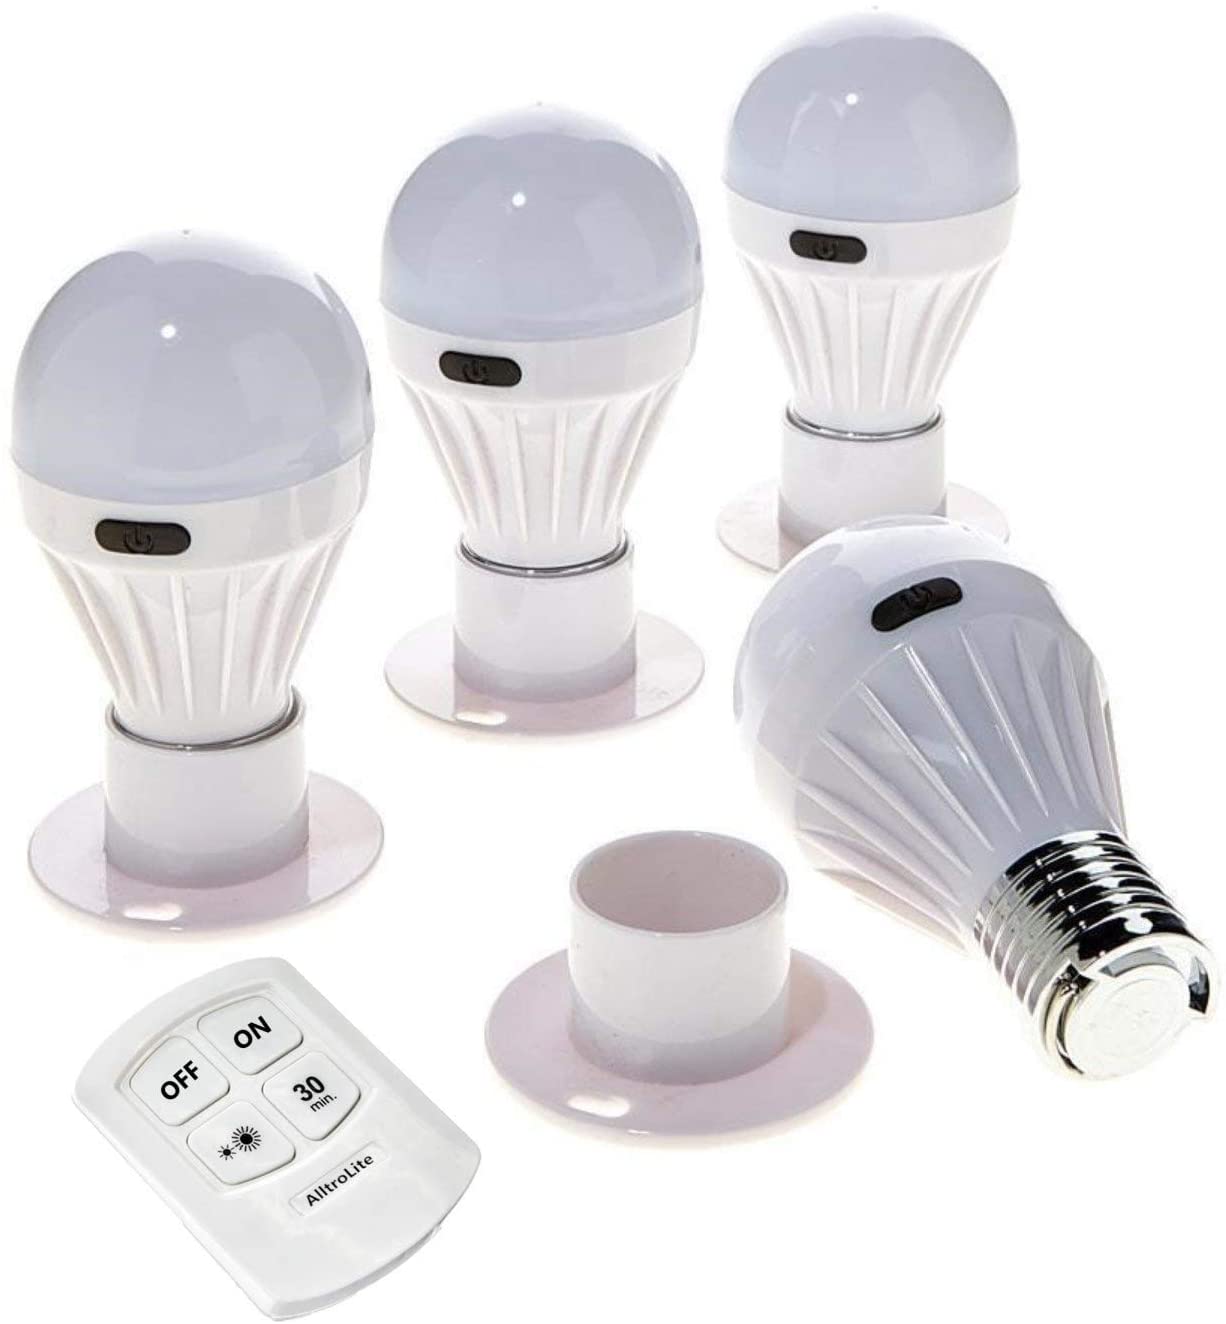 Alltro Battery Operated LED Night Lights